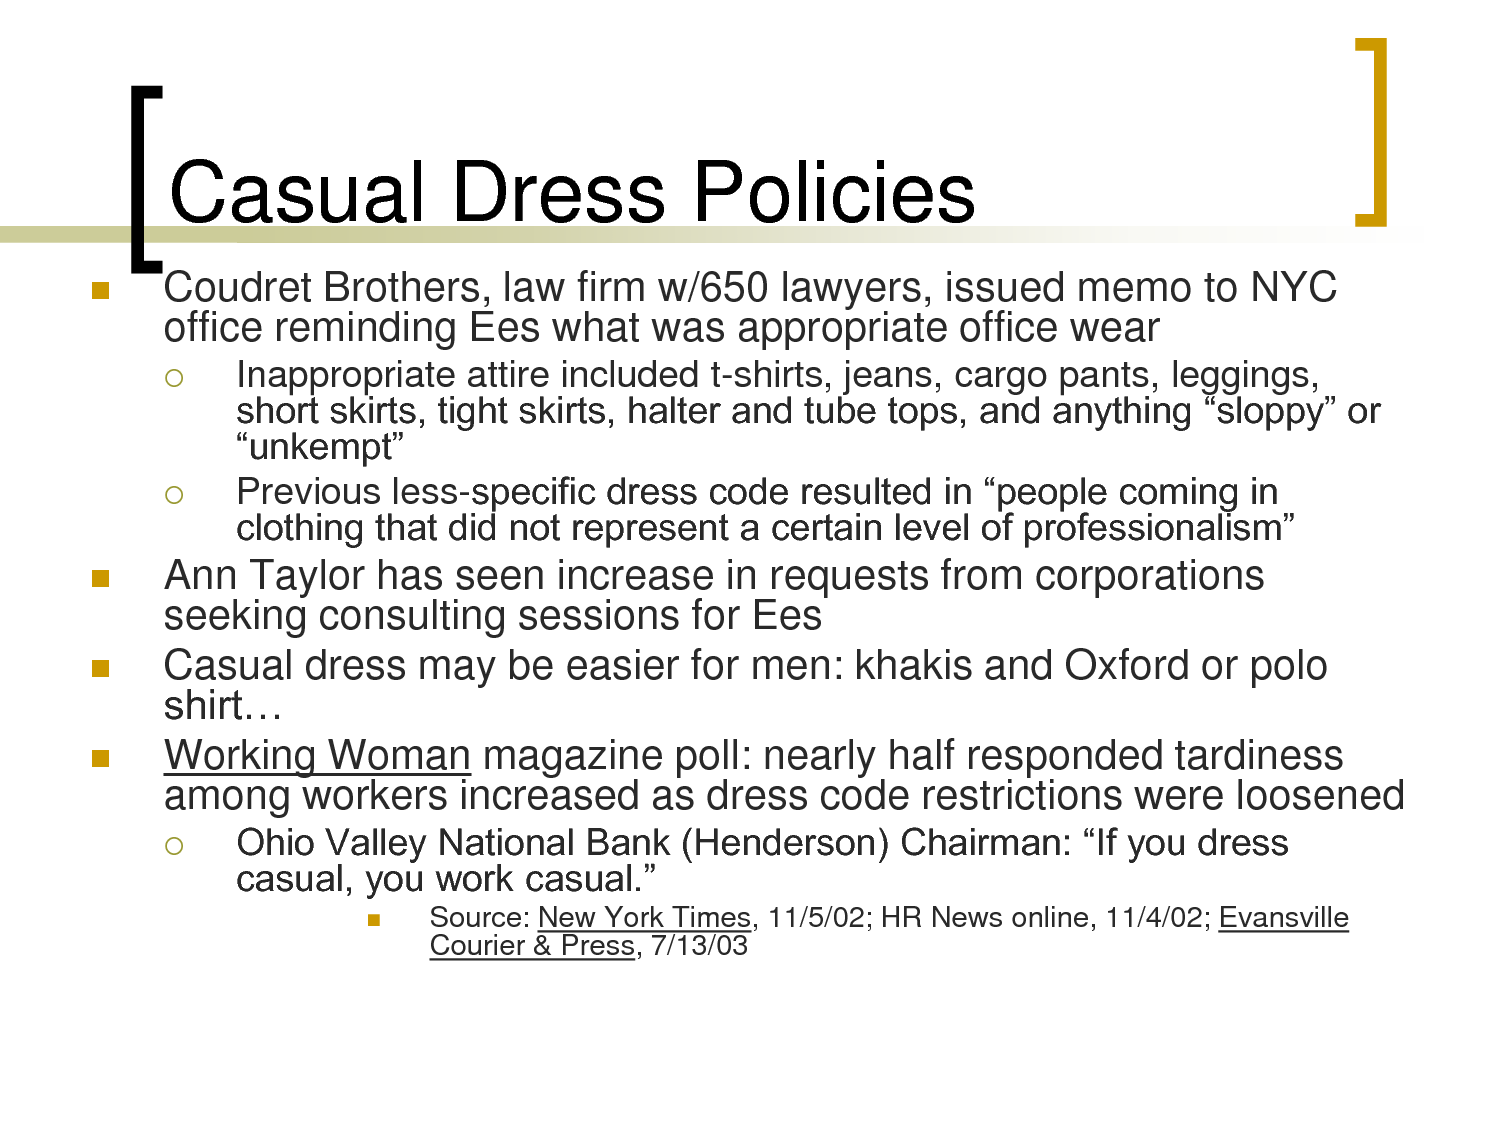 Canadian dress code policy for offices